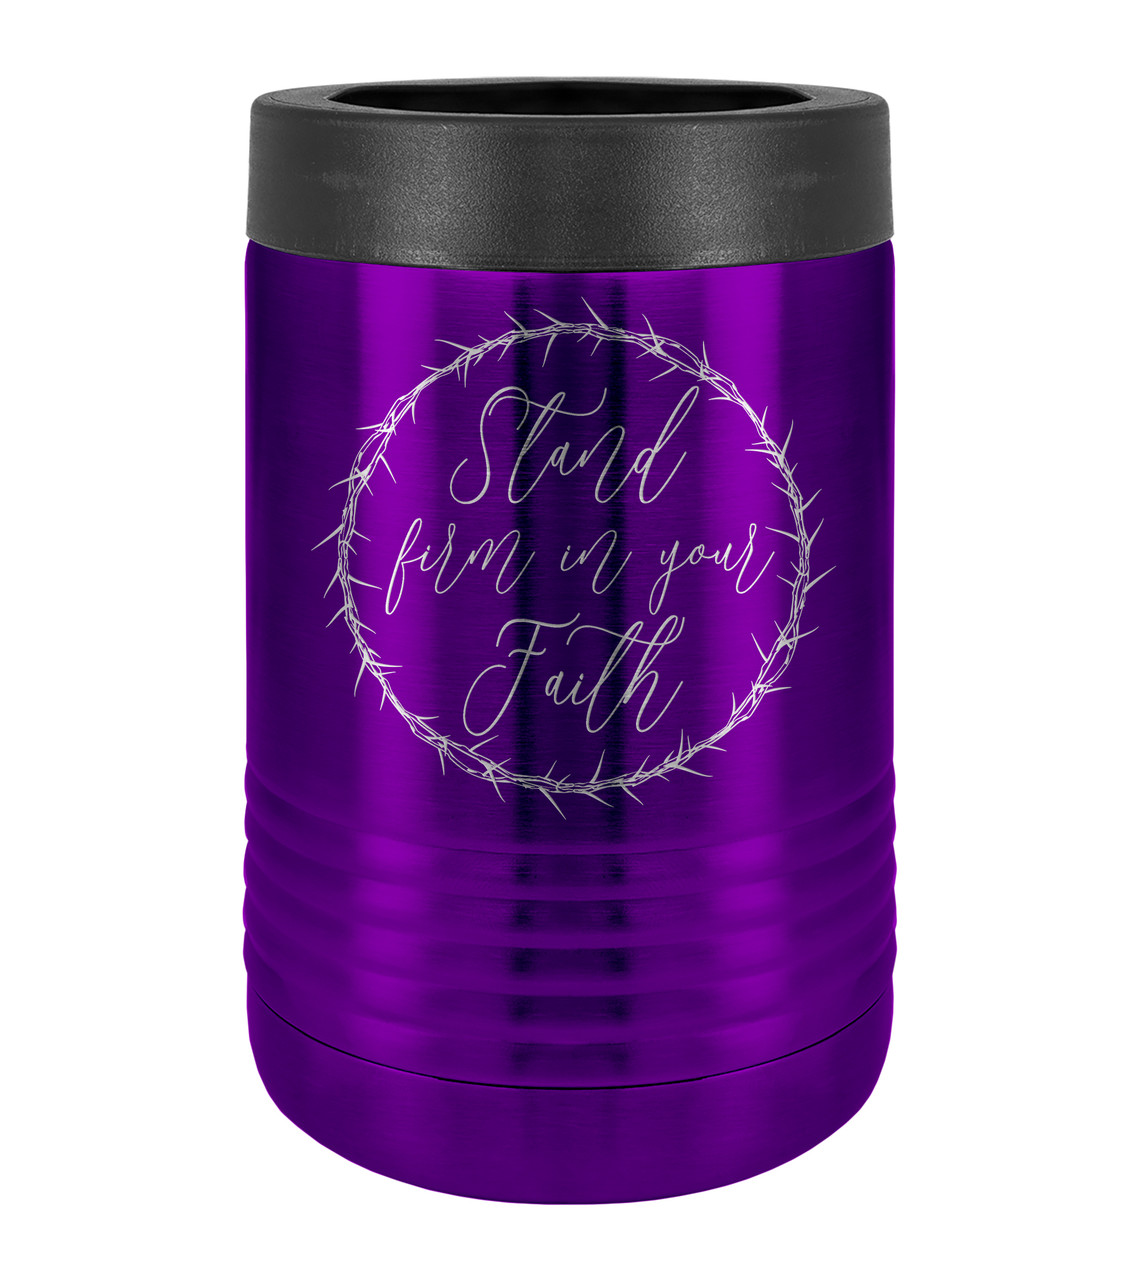 https://cdn11.bigcommerce.com/s-99vleihby8/images/stencil/1280x1280/products/1426/4883/Stand_Firm_in_Your_Faith_Koozie_-_metallic_grape__39888.1586803871.jpg?c=2